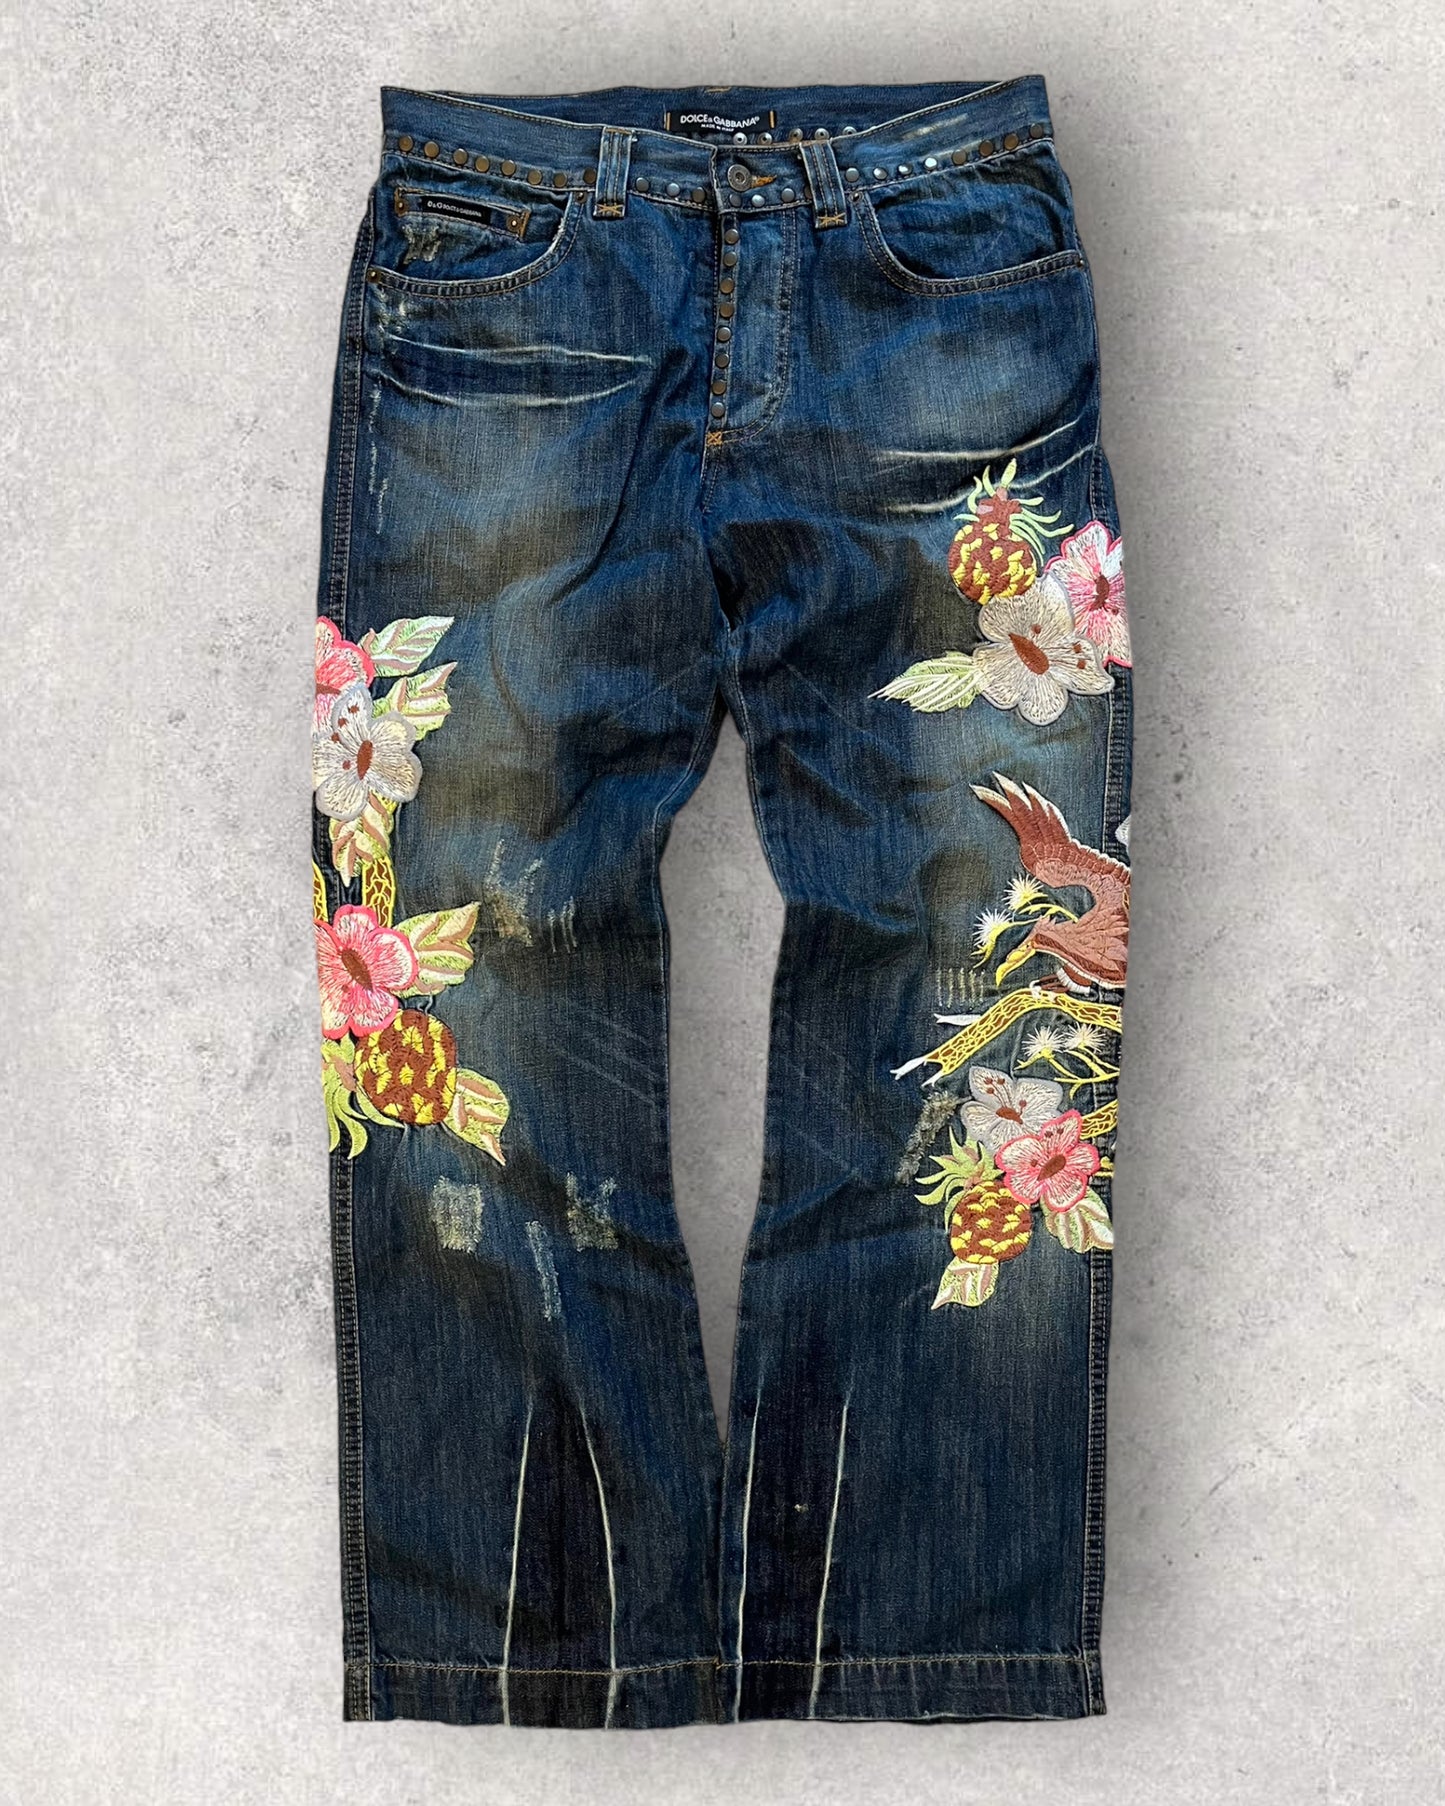 New Dolce & Gabbana Embroidered Jeans Hawaii Theme 5 Pocket Straight Leg  Size 42